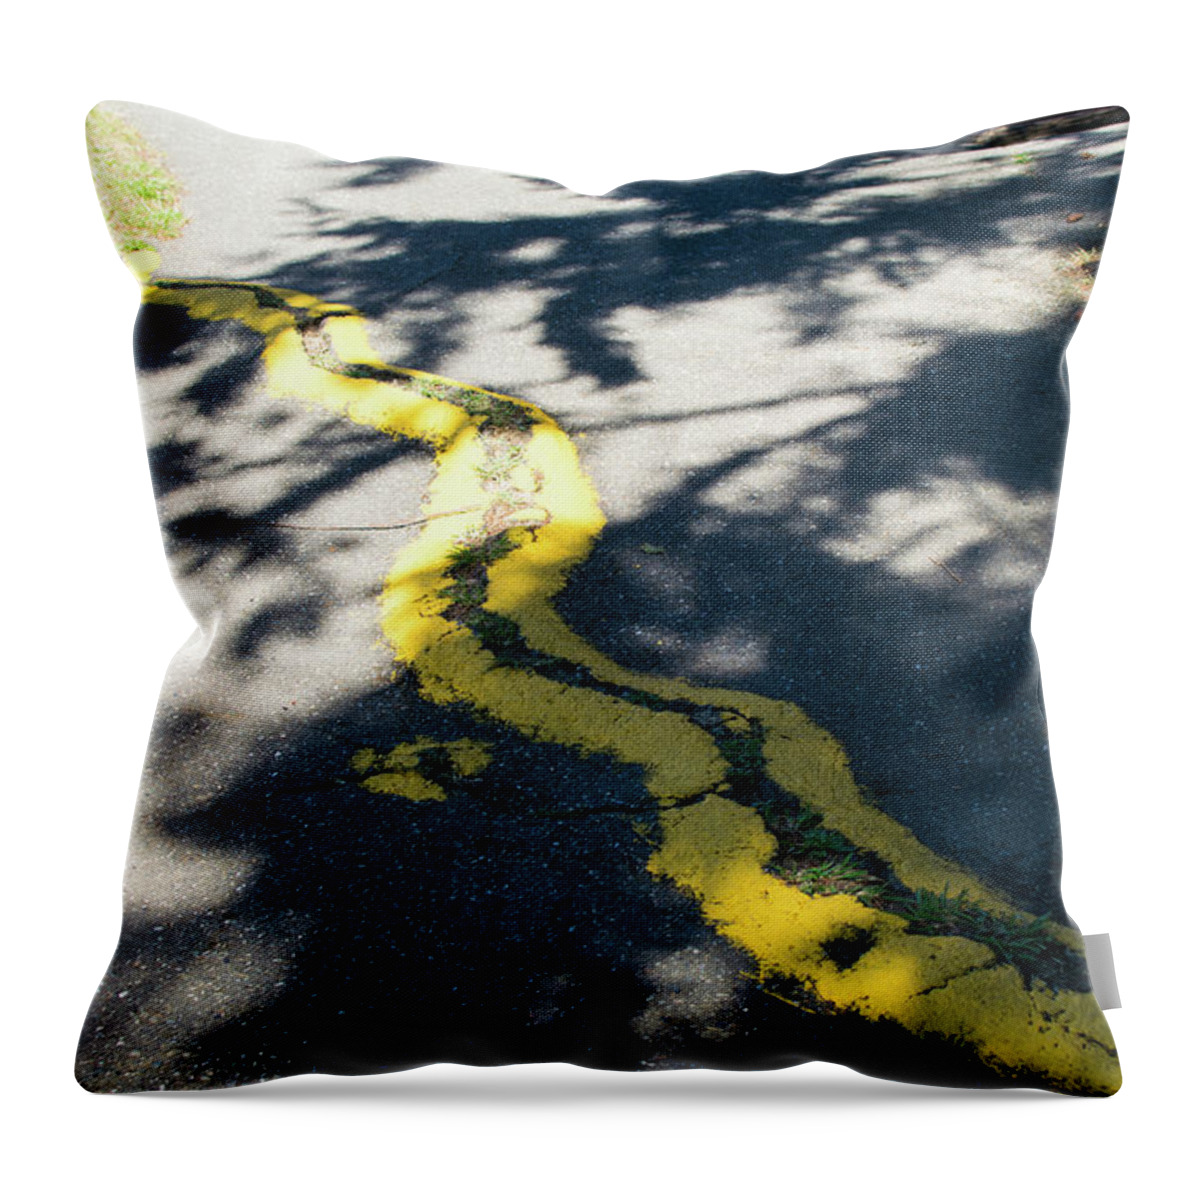 Runners Beware Throw Pillow featuring the photograph Runners Beware by Tom Cochran